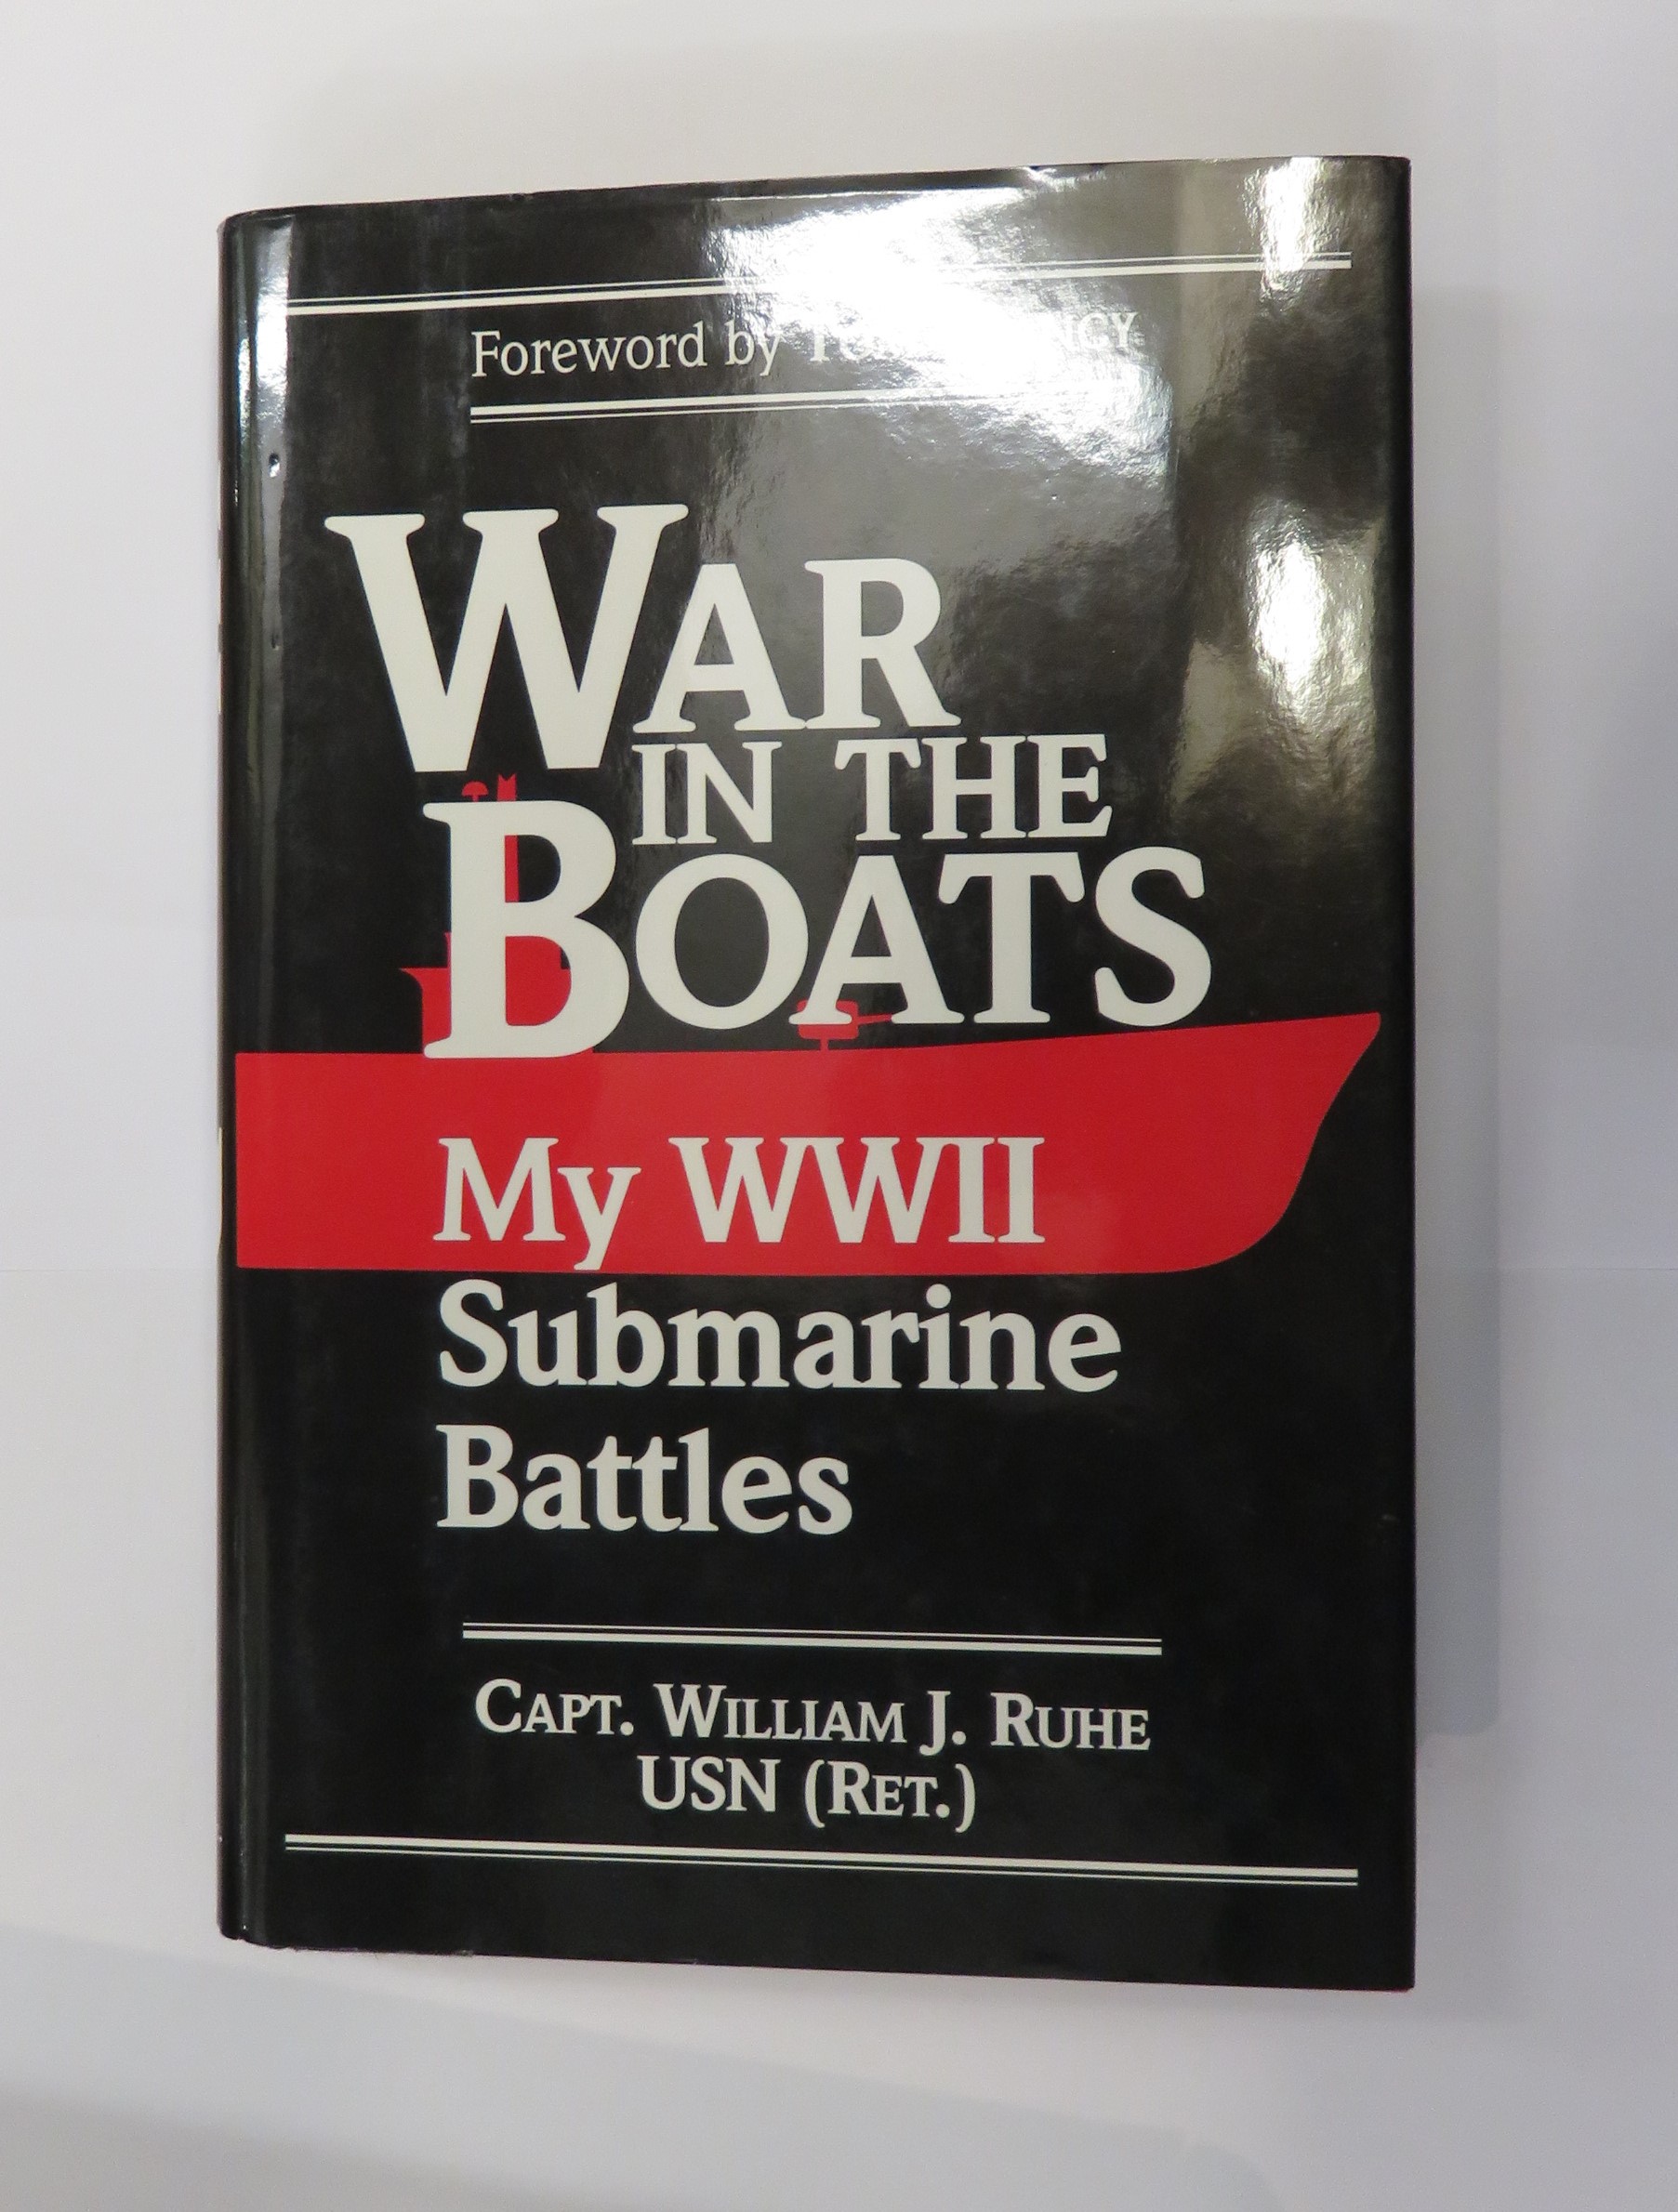 Wars in the Boats